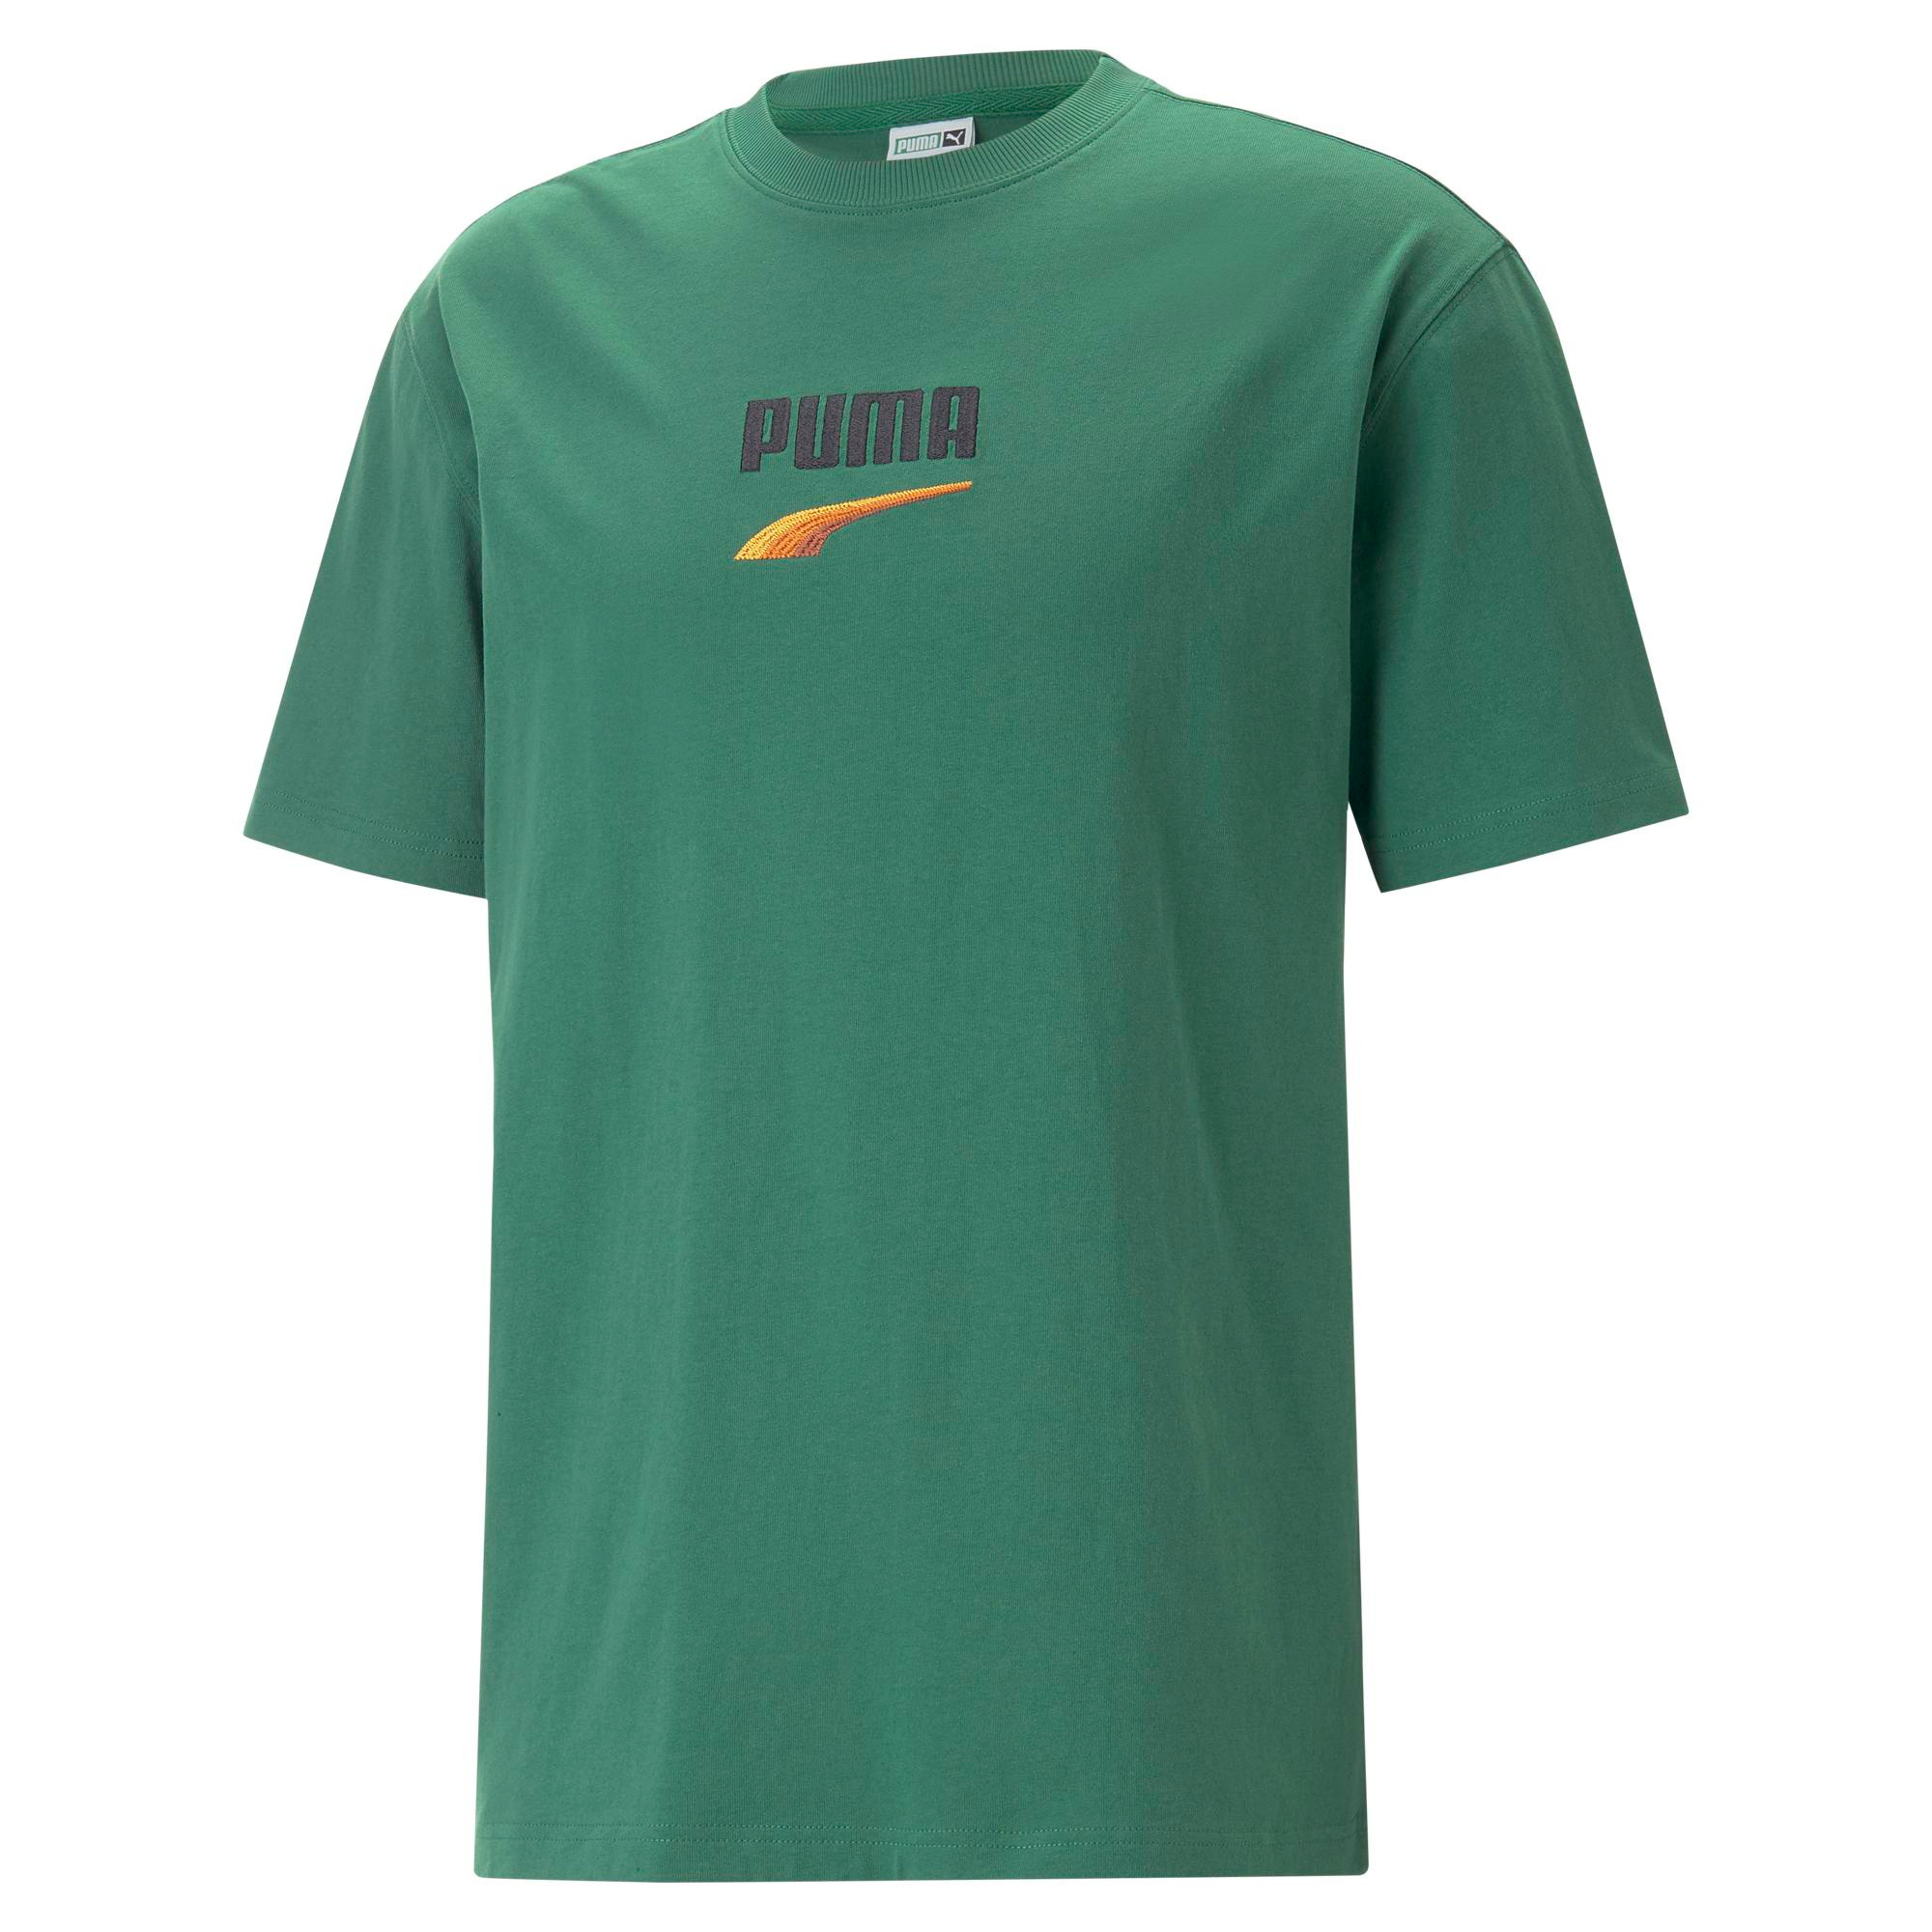 Puma - T-shirt in cotone con logo, Verde, large image number 0